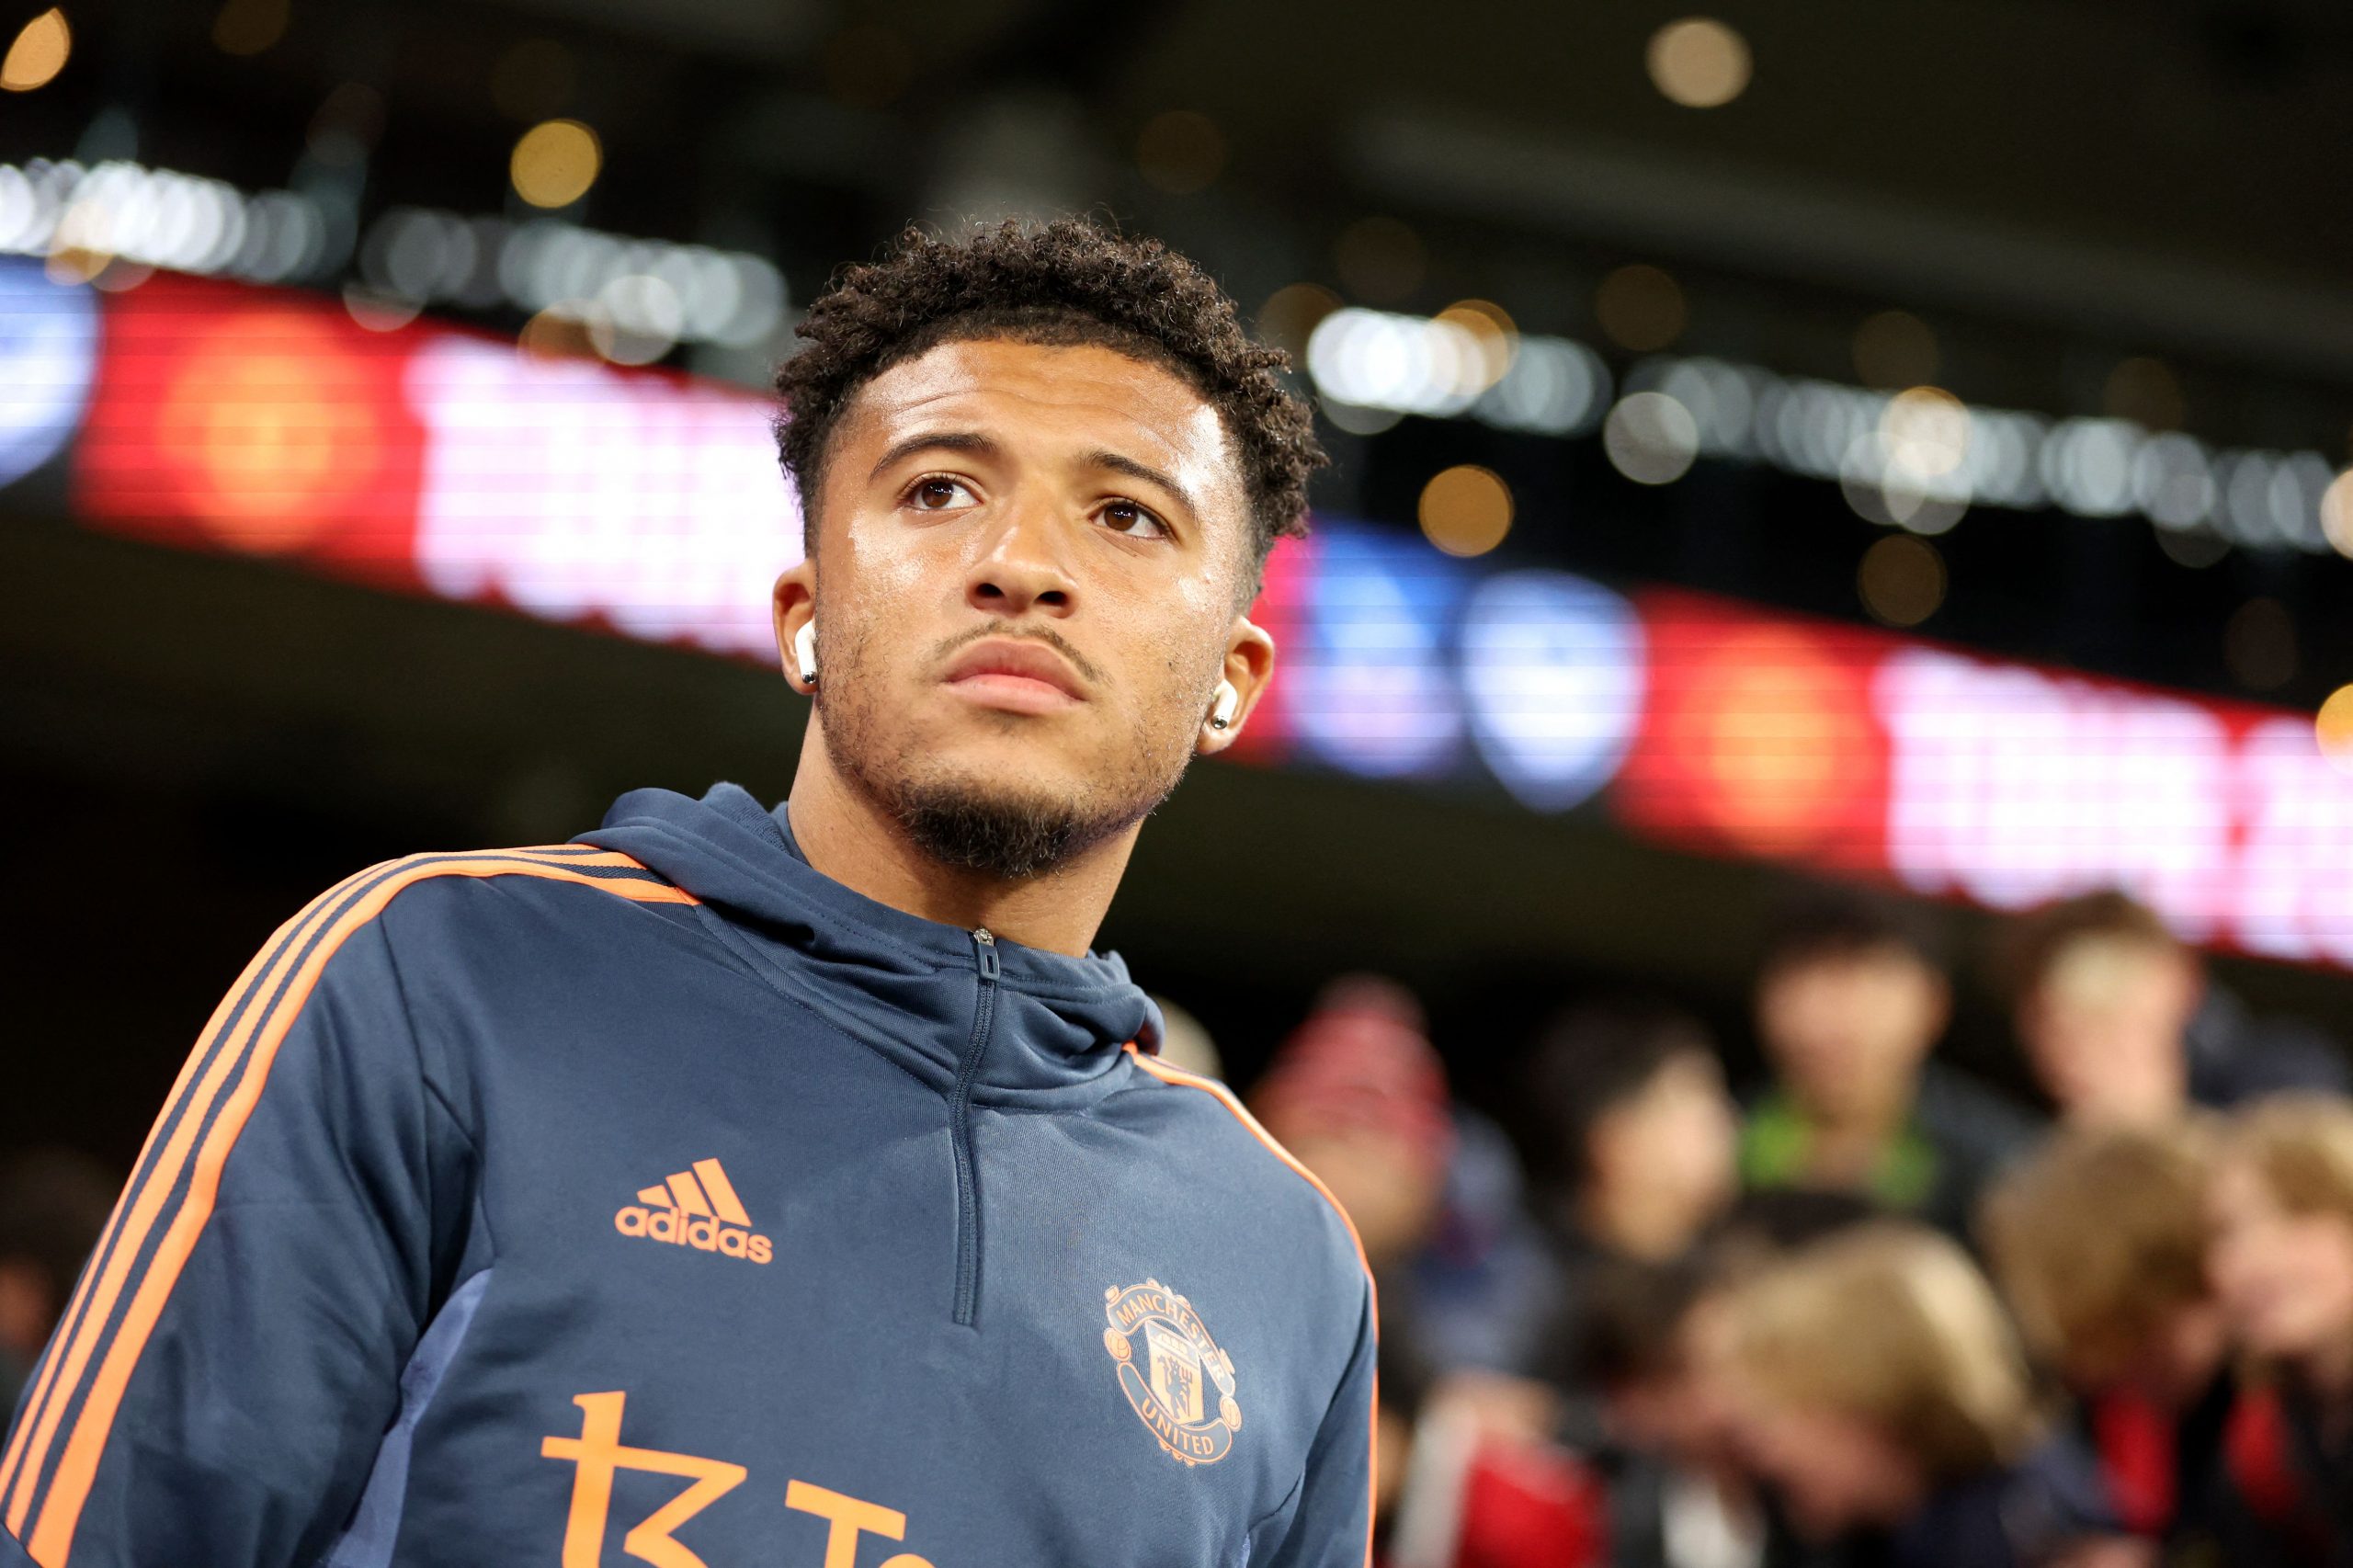 Jadon Sancho valued at around £45 million by Manchester United this summer.